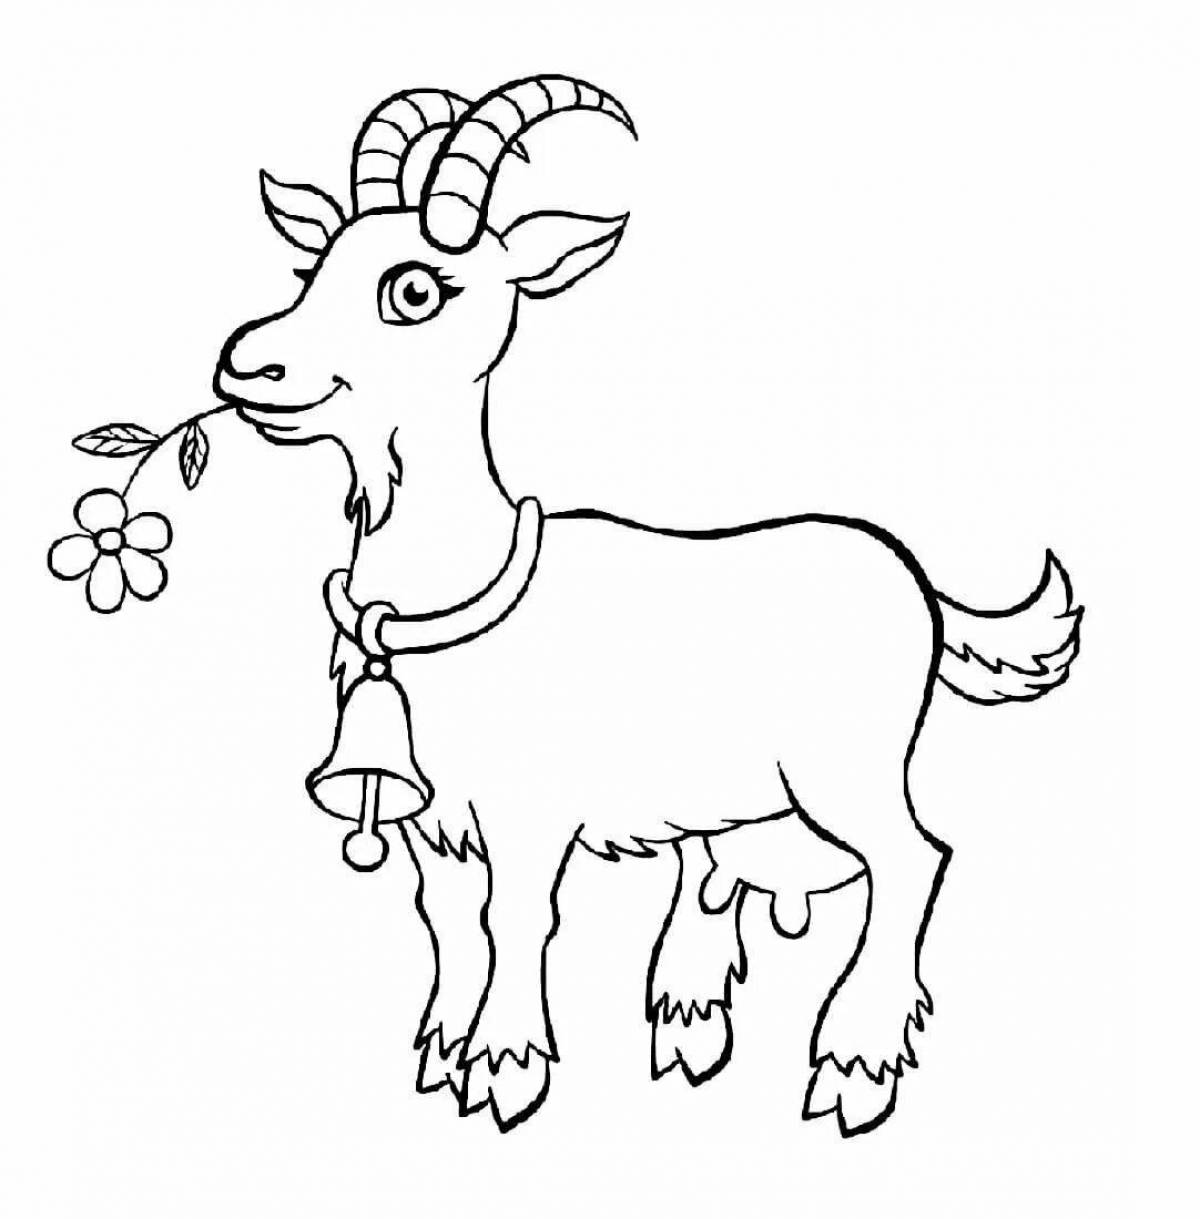 Fluffy goat coloring book for kids